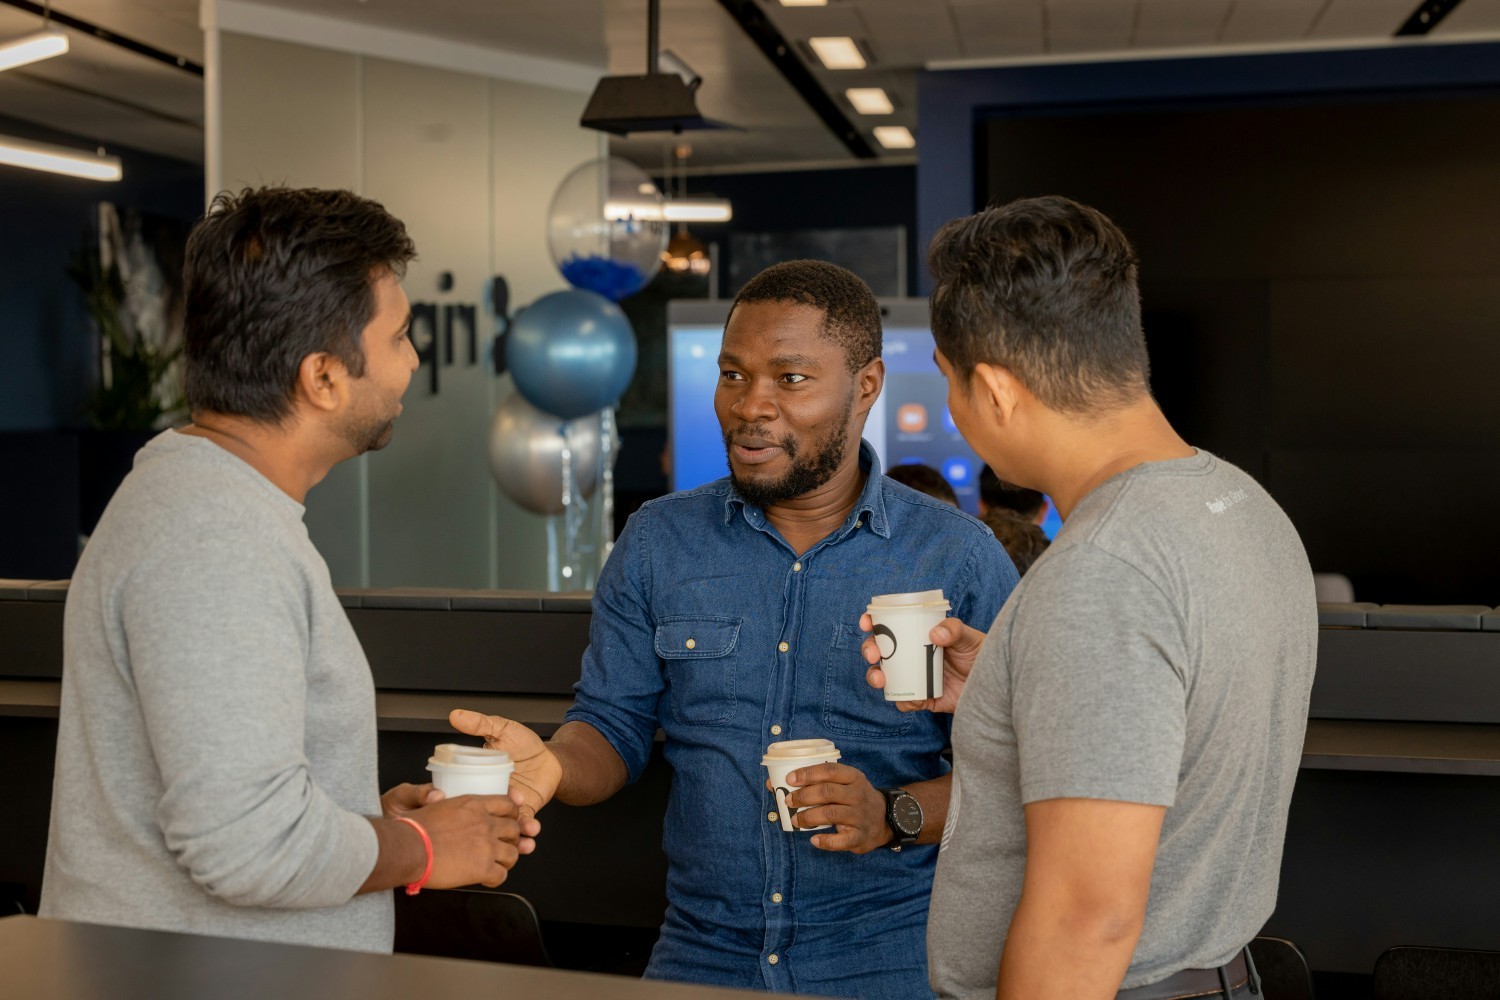 Teams often meet in our global offices' collaboration spaces for a quick stand-up or just to catch up with each other.